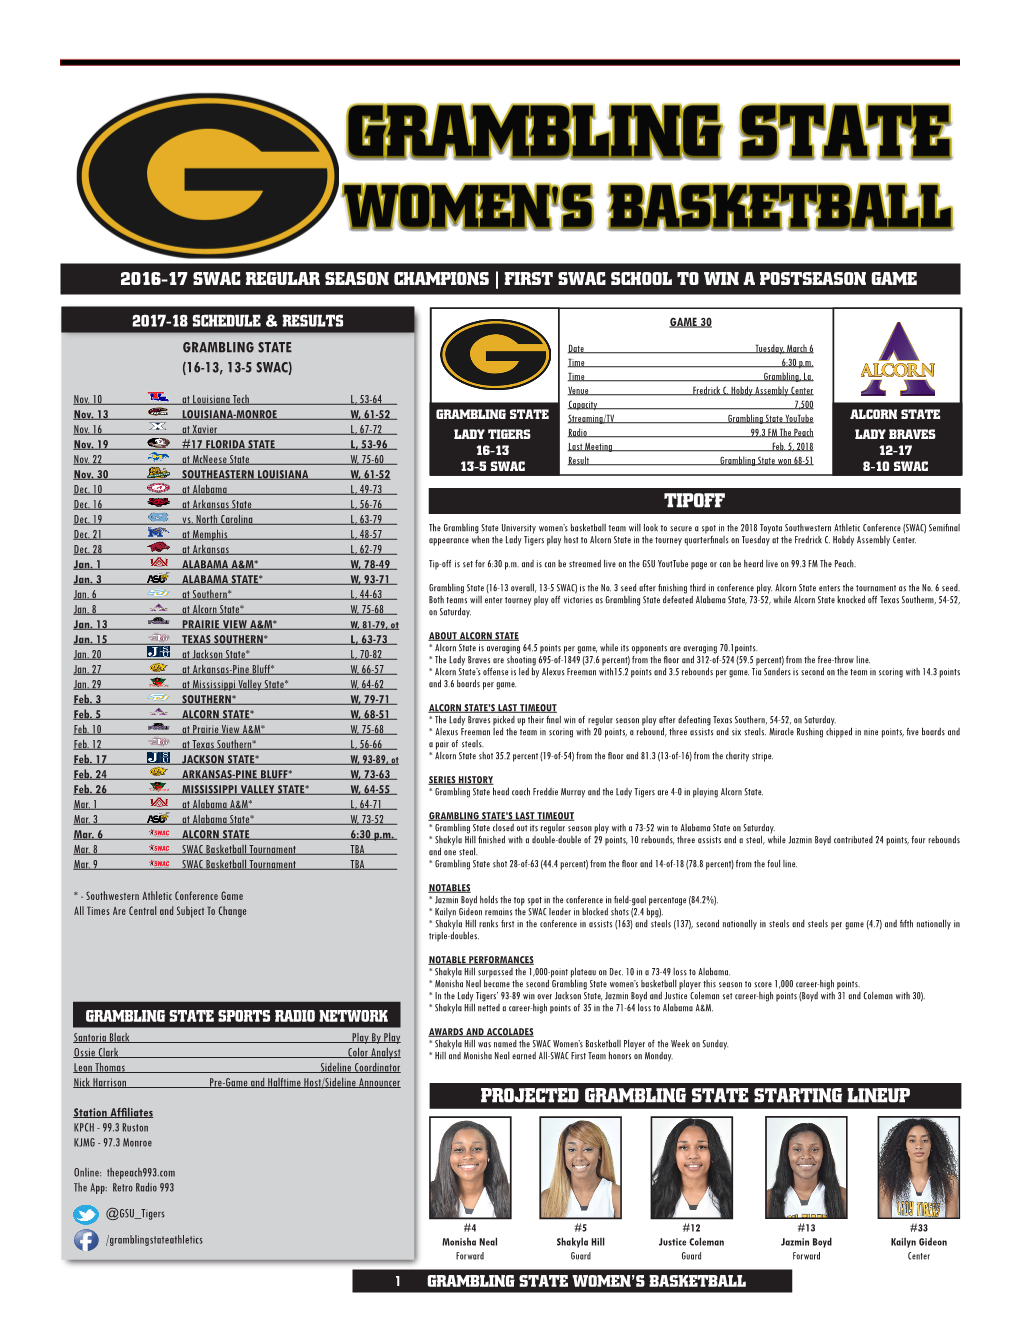 Tipoff Projected Grambling State Starting Lineup